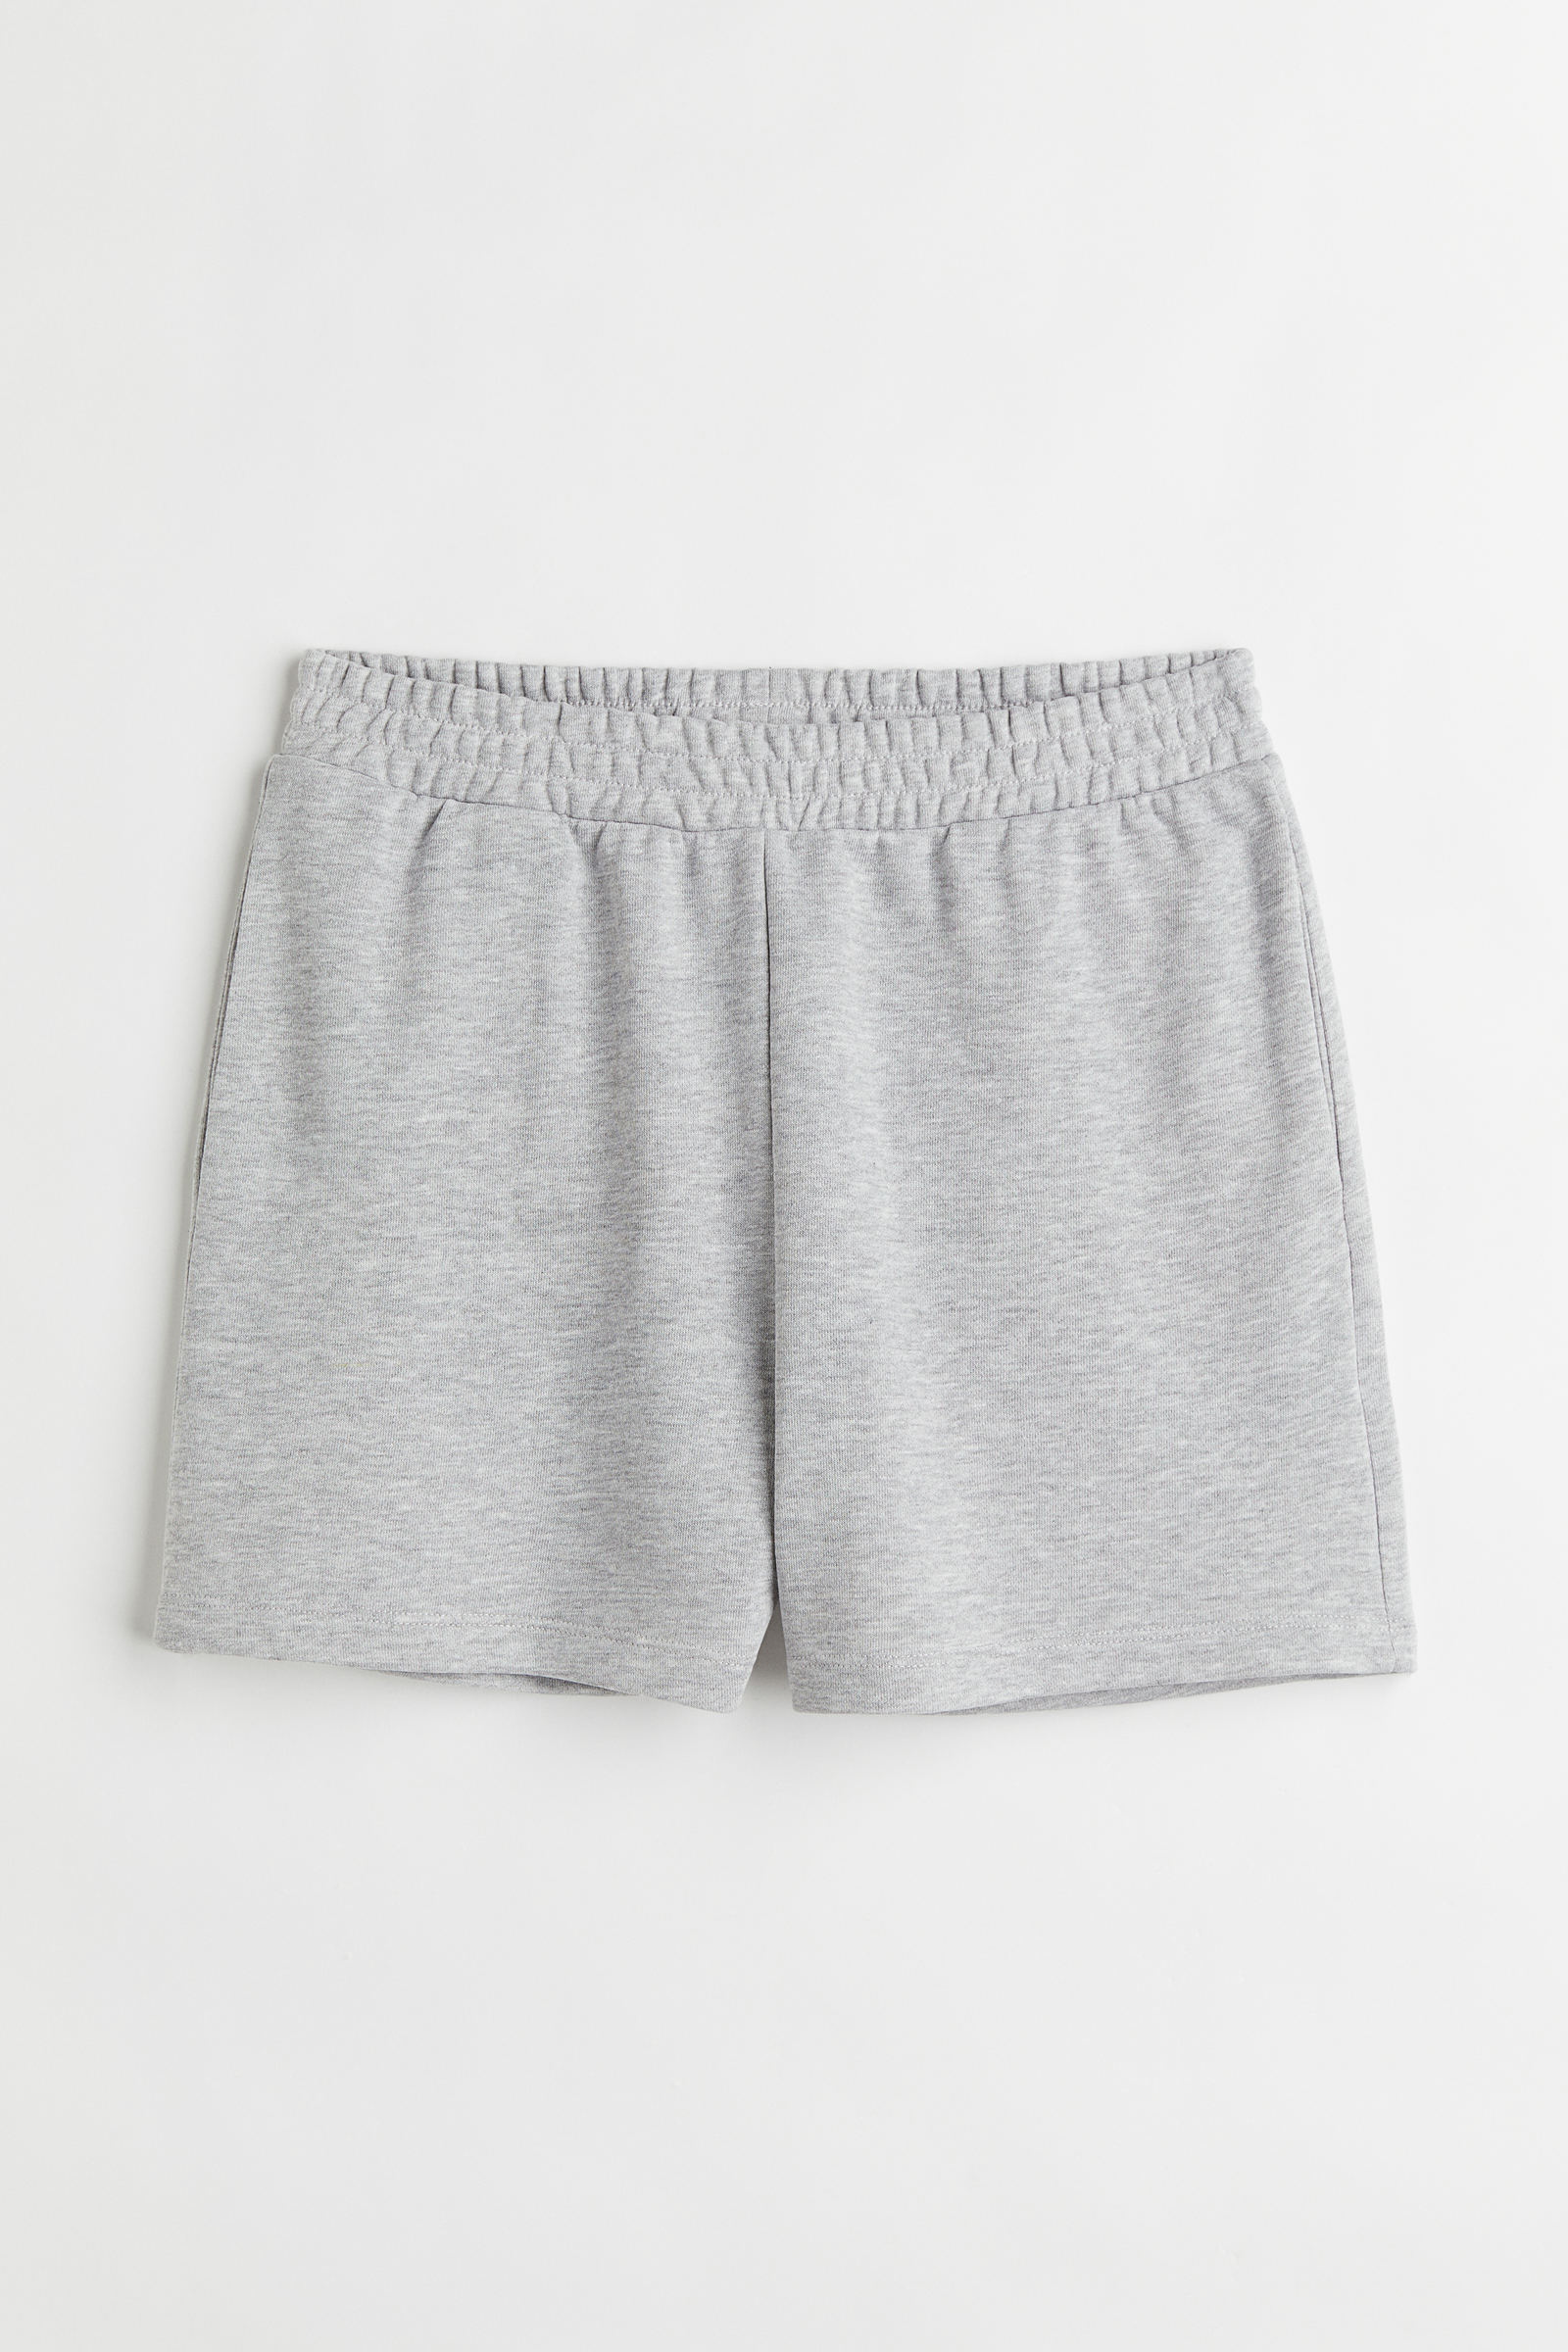 Shorts Moda Mujer | H&M CL - H&M CL